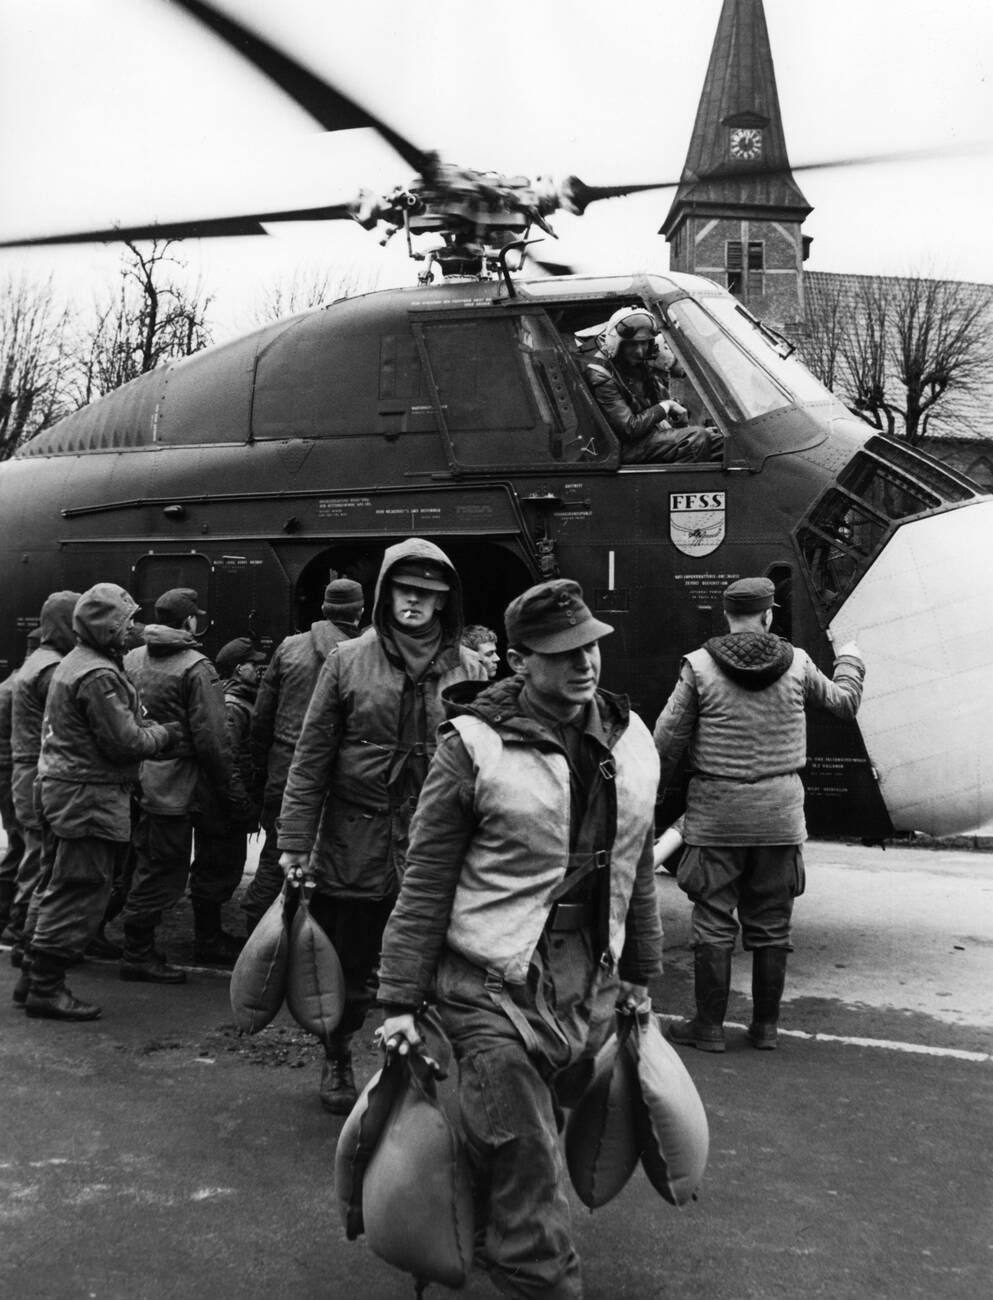 Sandbags being unloaded from a helicopter during the North Sea Flood of 1962 in Hamburg, West Germany